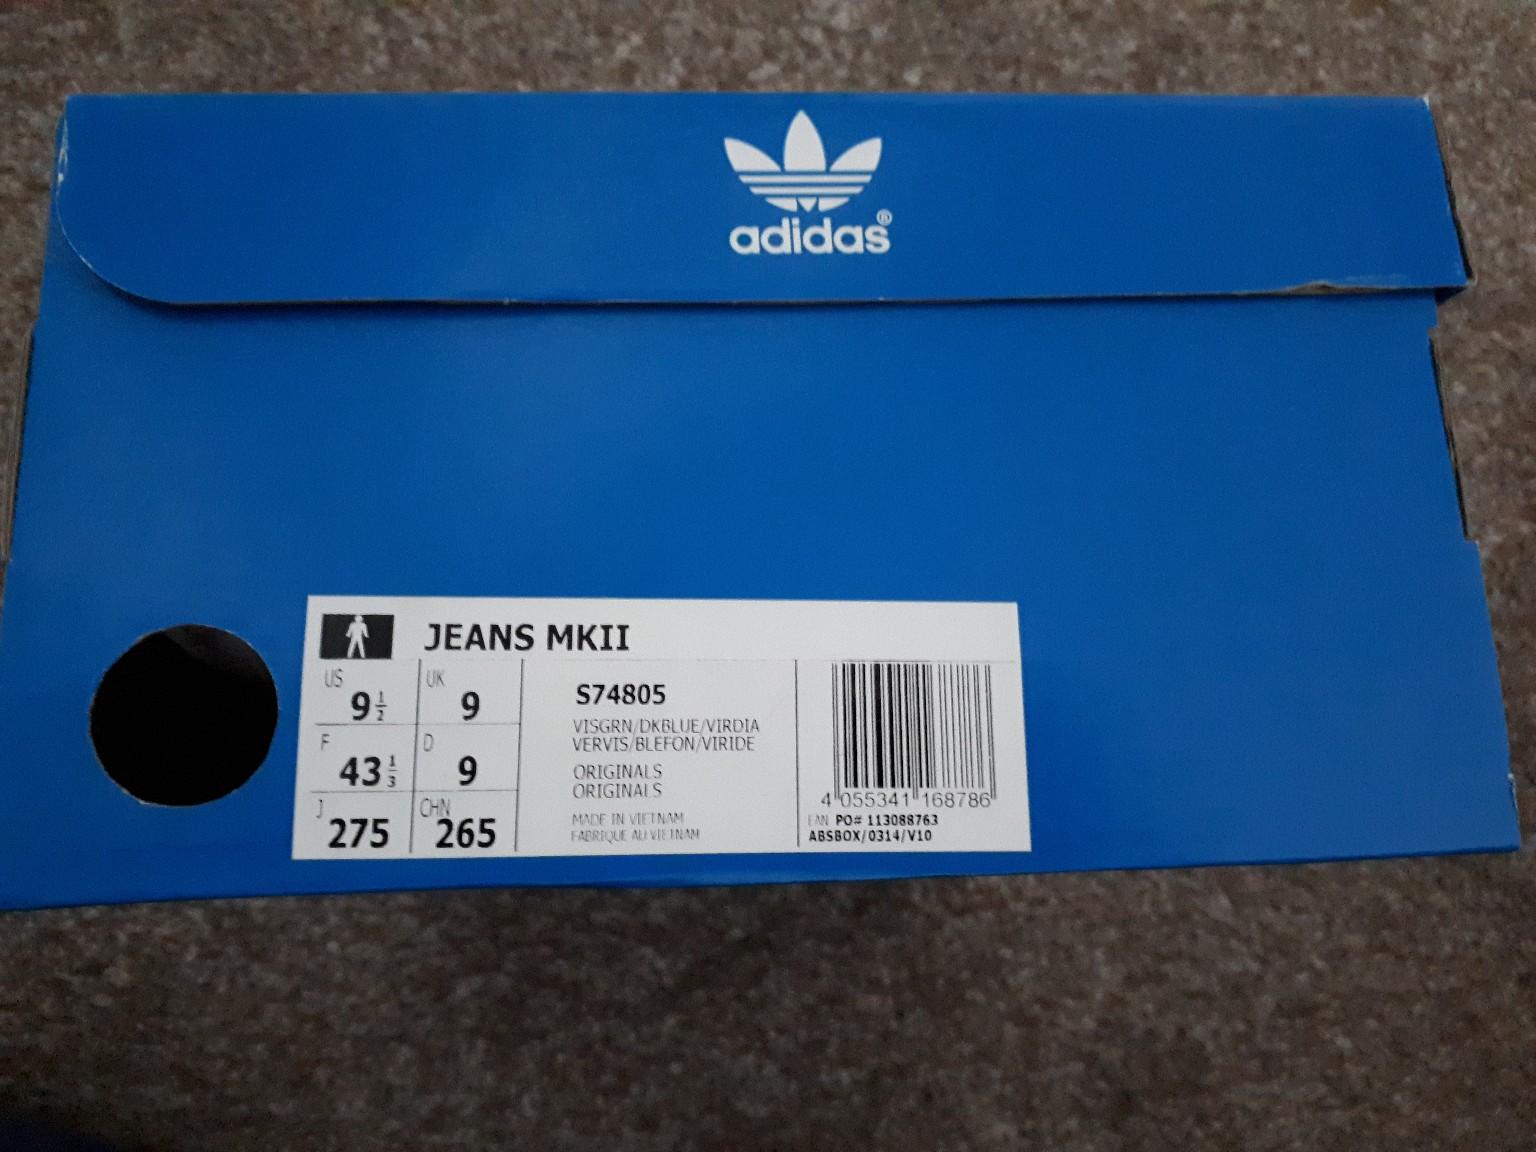 adidas jeans mkii size 9